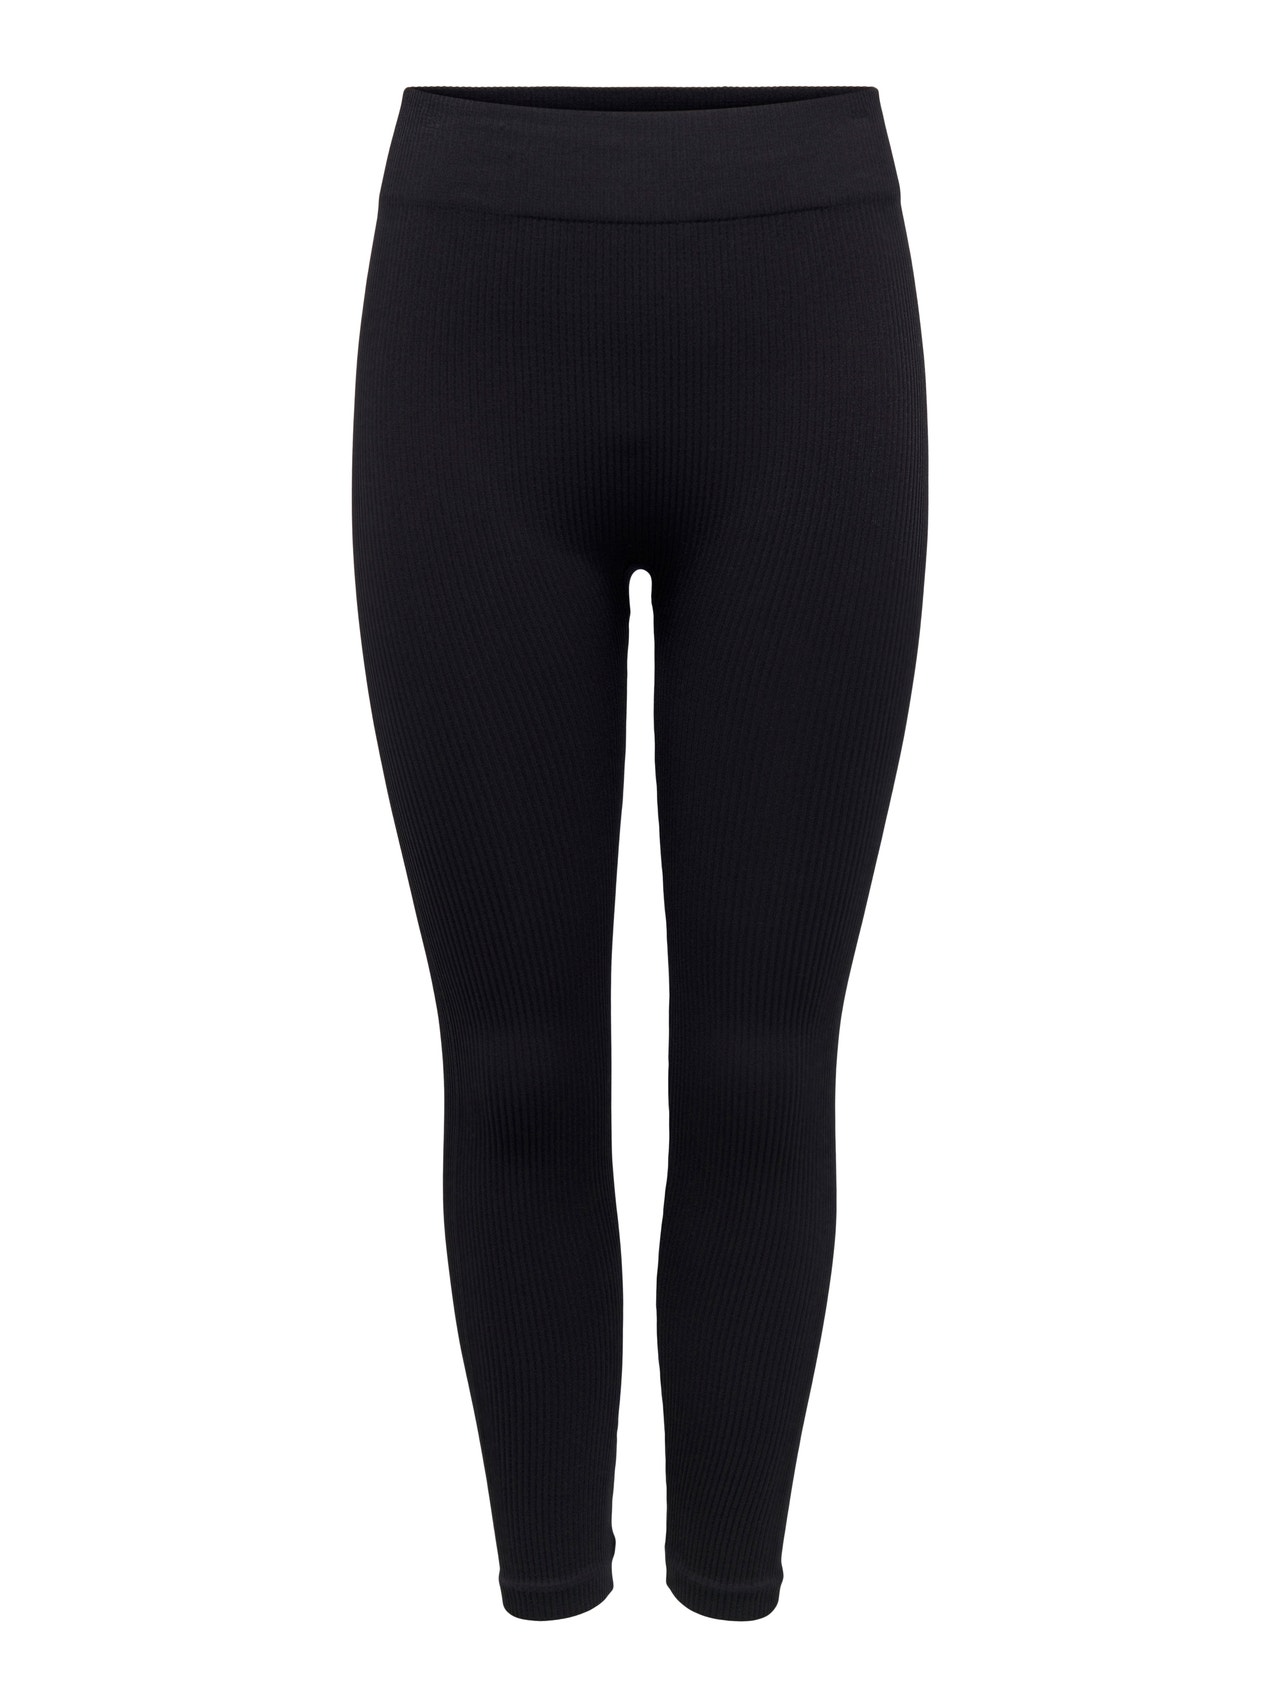 https://images.only.com/15289048/4177699/001/only-curvyribtrainingleggings-black.jpg?v=2f1c6a14d17f9501b1ea0233ce76bff9&format=webp&width=1280&quality=90&key=25-0-3